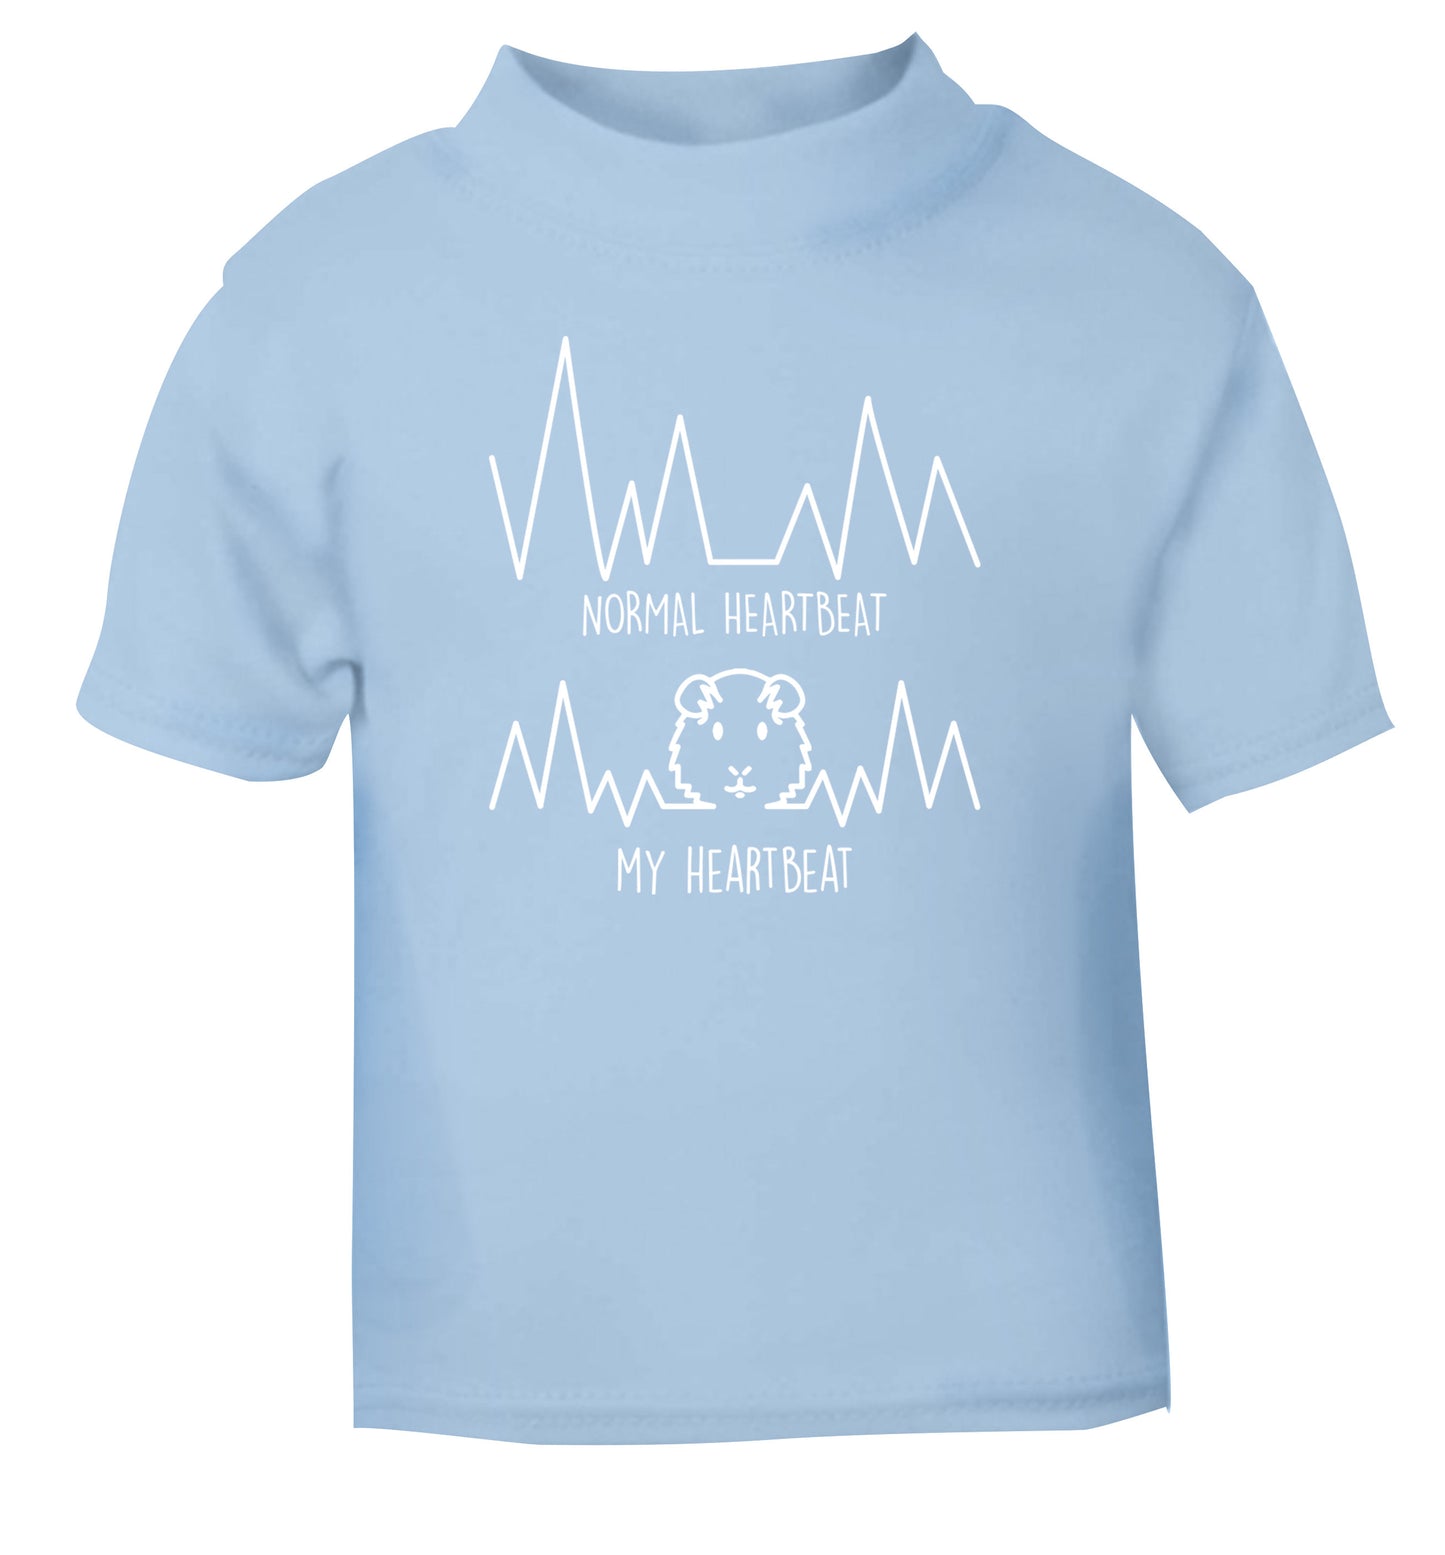 Normal heartbeat vs my heartbeat guinea pig lover light blue Baby Toddler Tshirt 2 Years